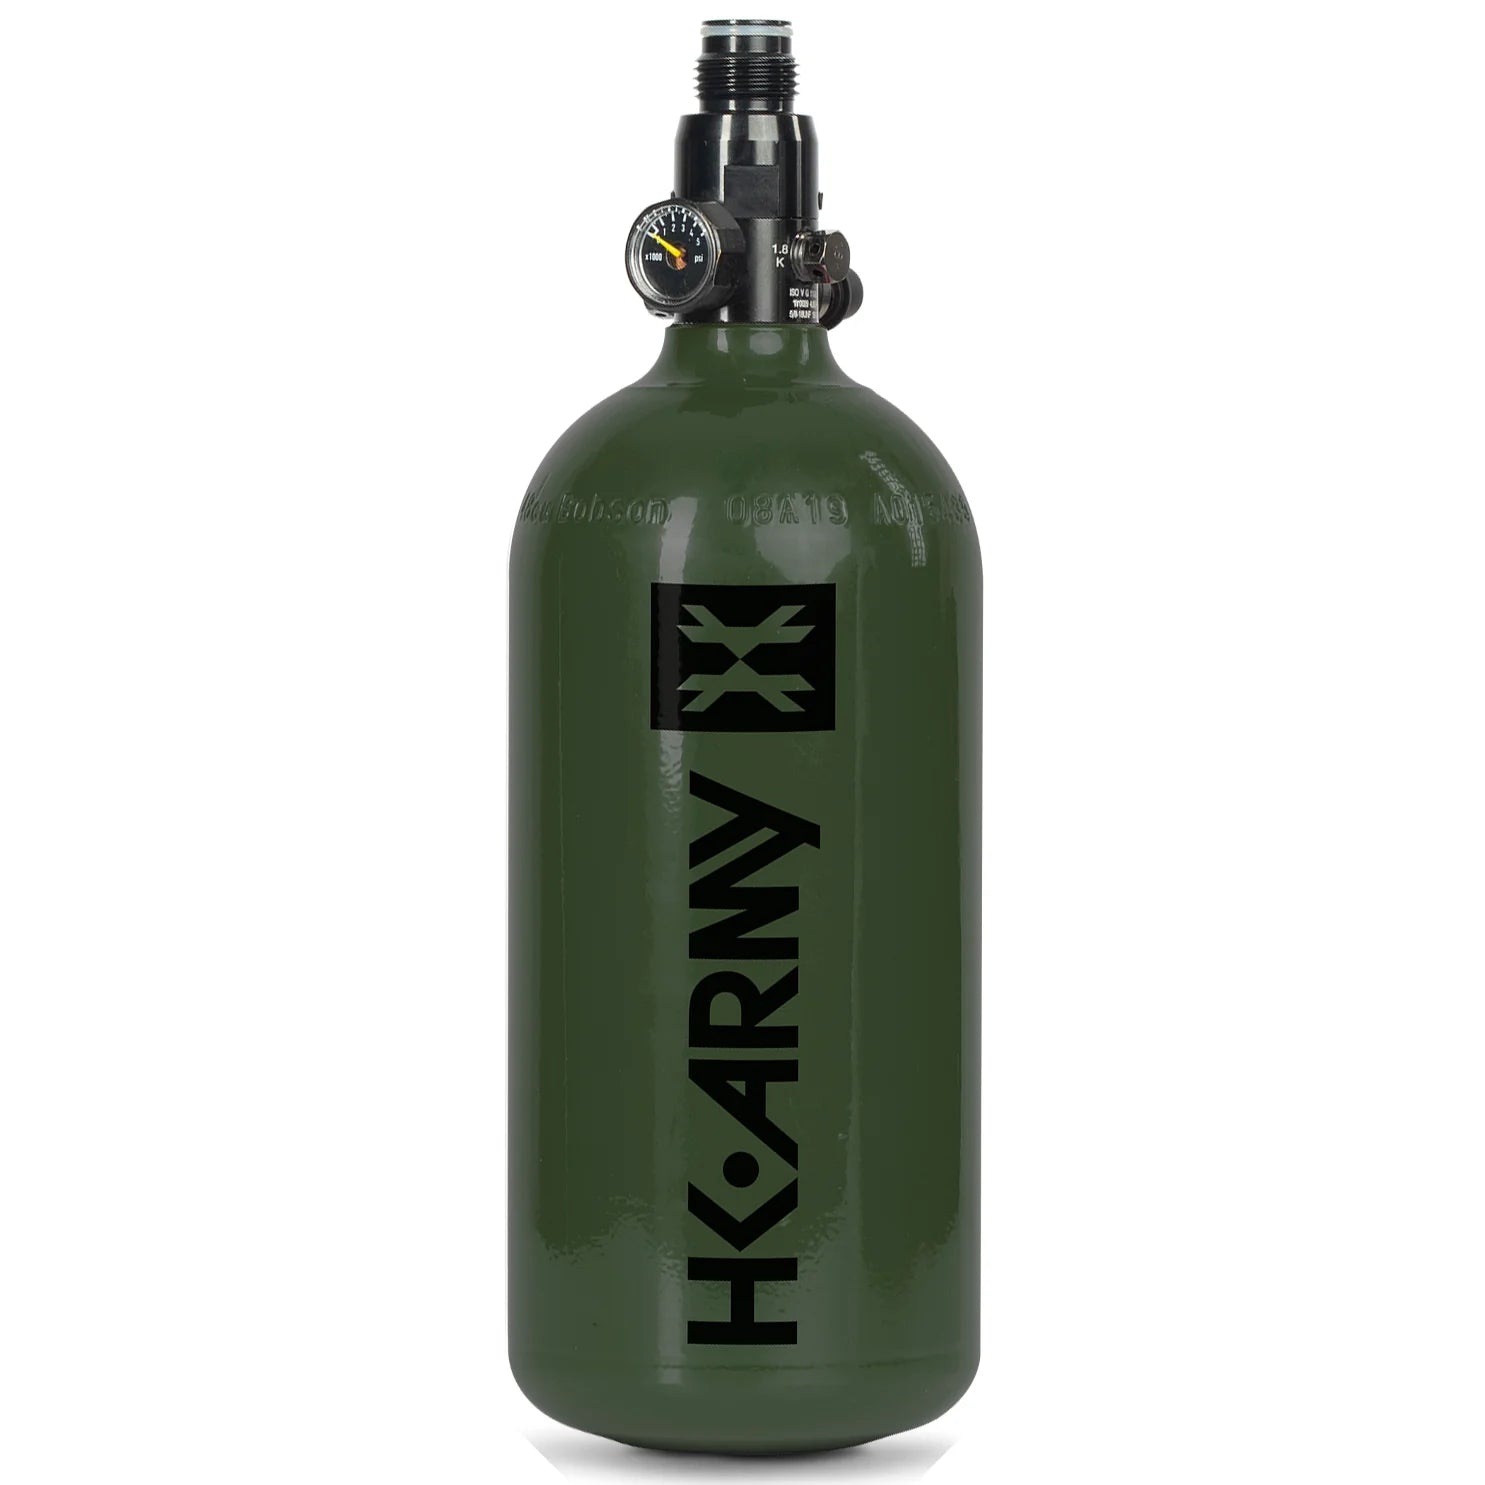 48ci / 3000psi -  Paintball Compressed Air Tank - Olive | HK Army